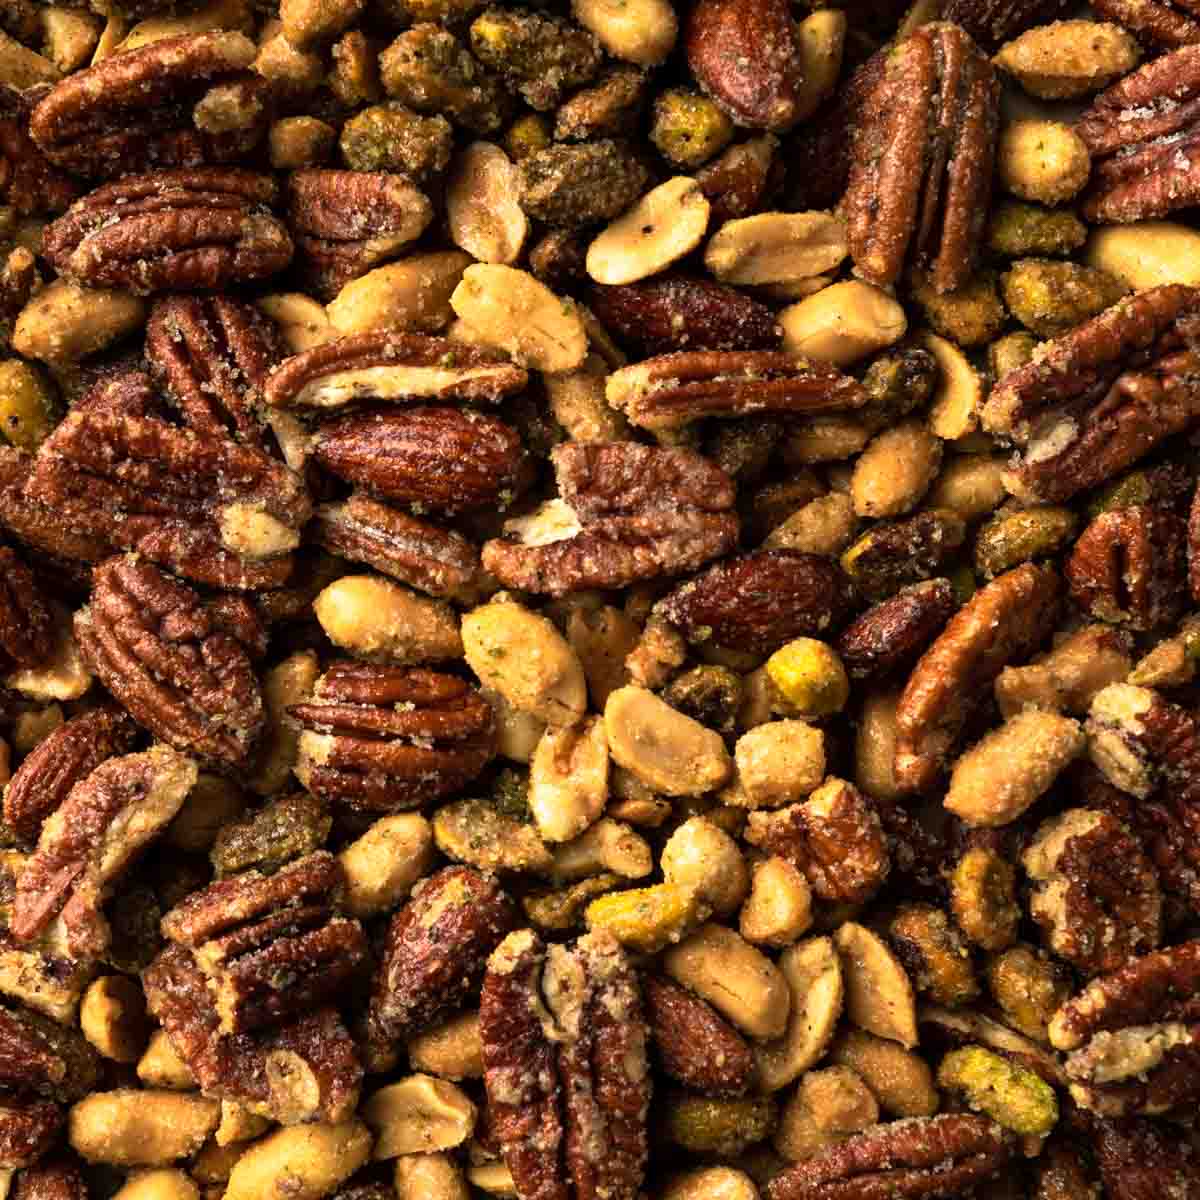 A close up image of oven roasted candied nuts.